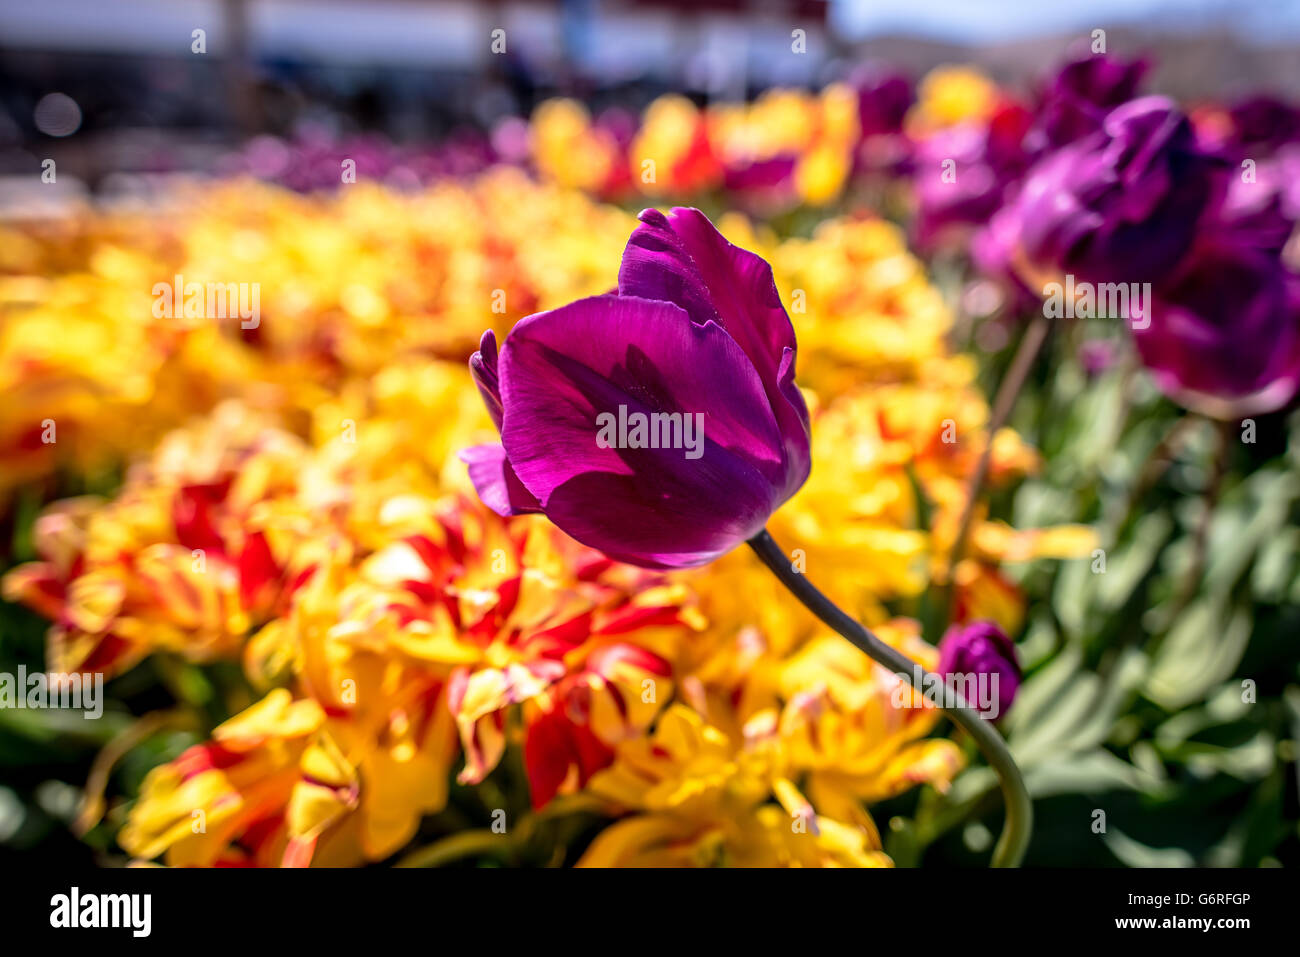 Closeup of purple tulip with short depth of field. Yellow flowers in the background Stock Photo